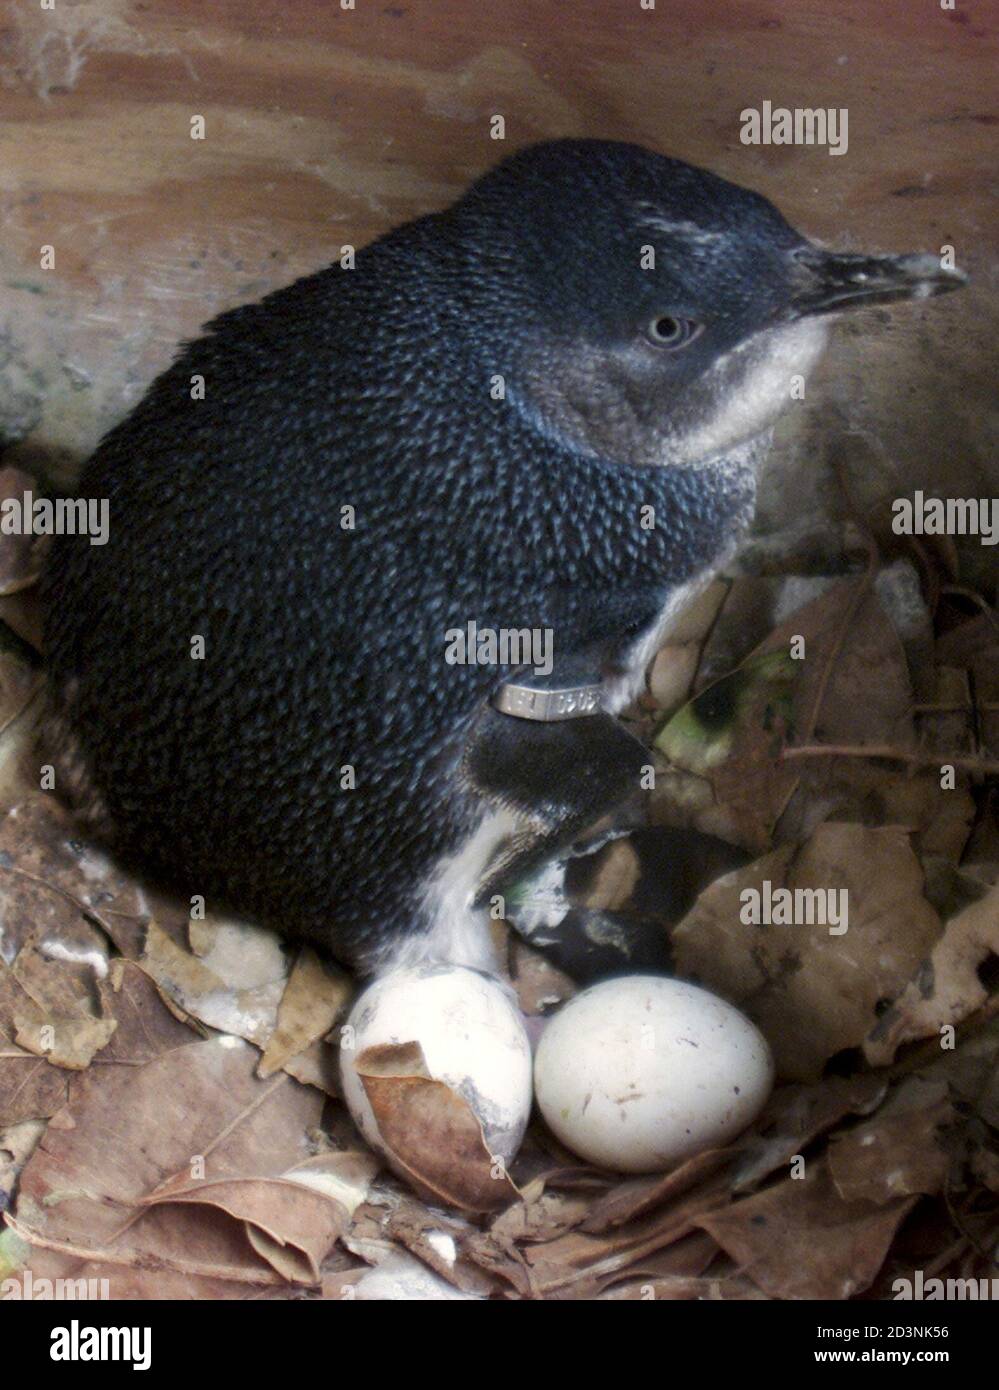 A Little Penguin or more commonly referred to as Fairy Penguin sits protecting her eggs in a man-made hutch on the foreshore of Sydney Harbour October 25, 2001 as National Parks and Wildlife Serice (NPWS) officers conduct studies on the endangered species. The 70 breeding pairs of penguins is believed to be the only colony to inhabit a major city in the world, with the decline in the formerly extensive population believed to be attributed to habitat destruction by urban develoment and predation from cats and dogs. REUTERS/Mark Baker  MDB/DL Stock Photo